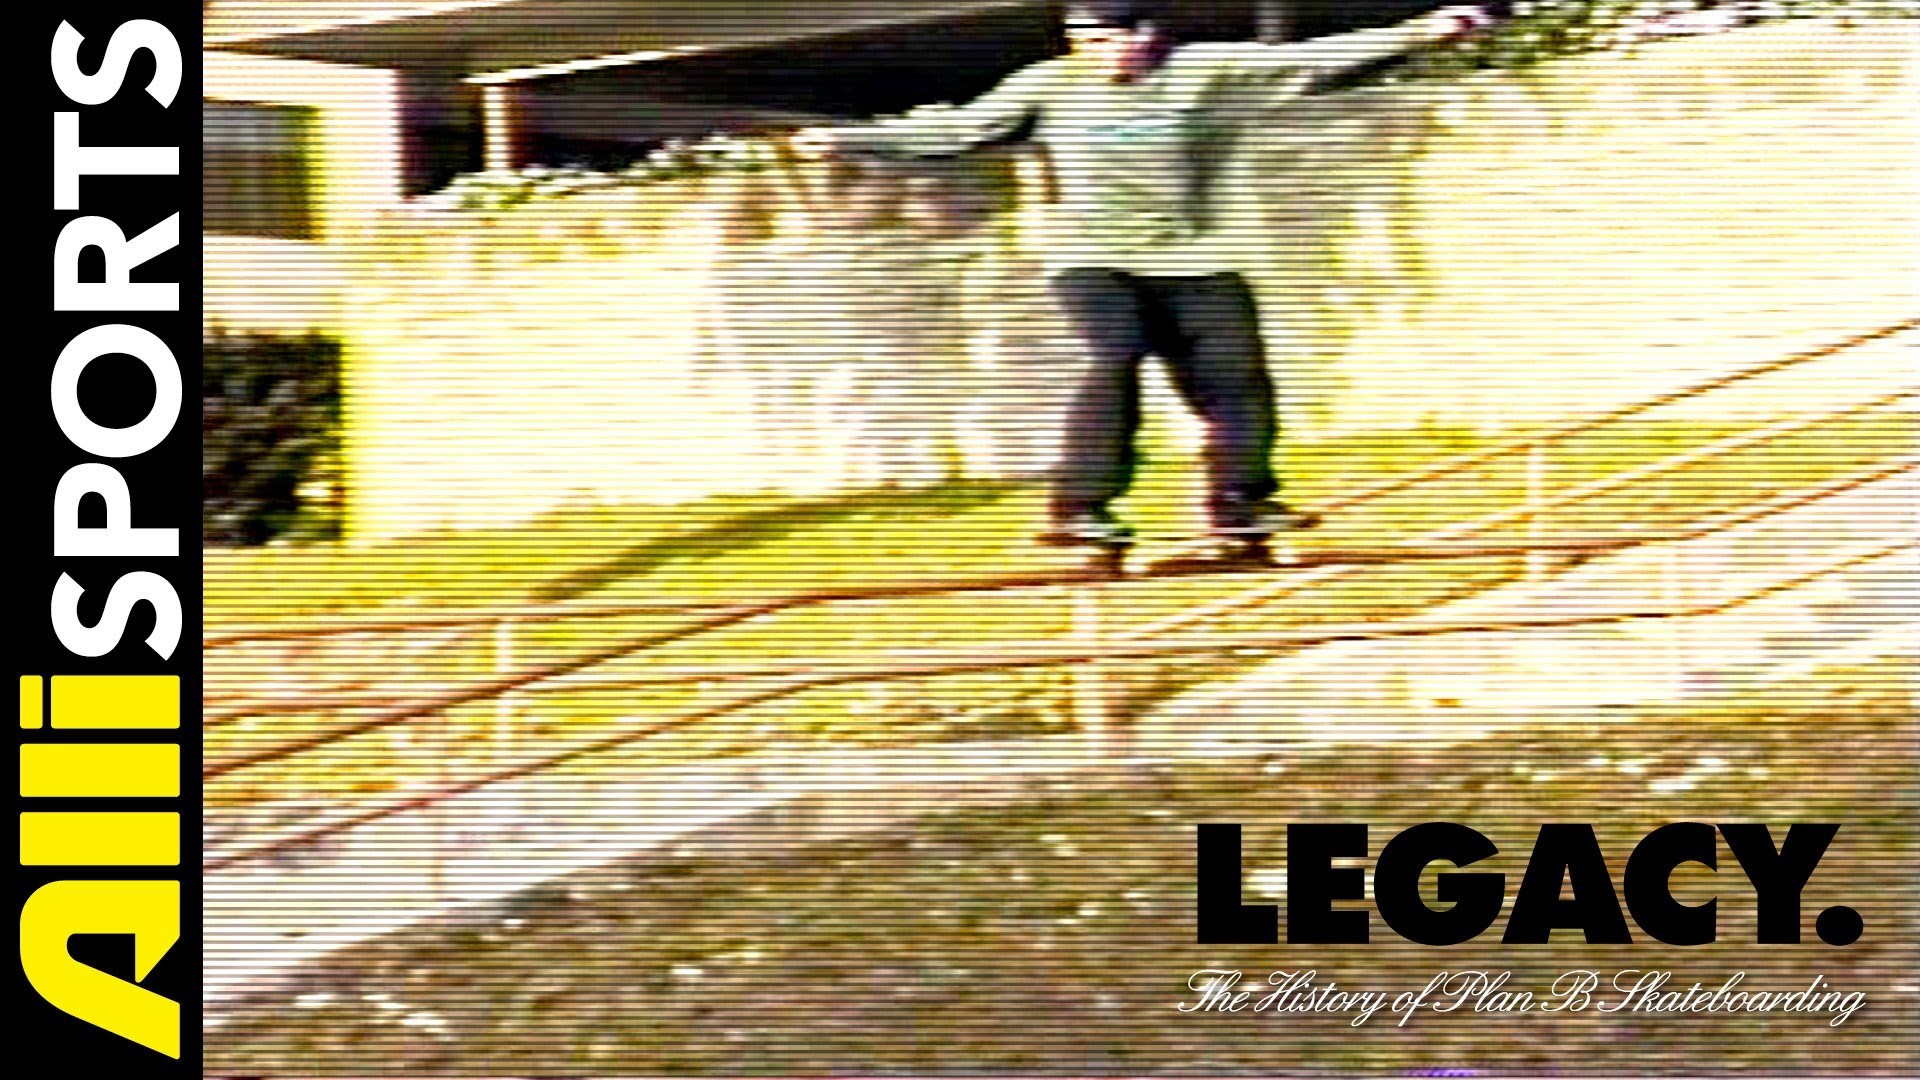 1920x1080 The Rise of the Video Part, Pat Duffy's Breakout | Legacy. The History of Plan  B Skateboarding - YouTube